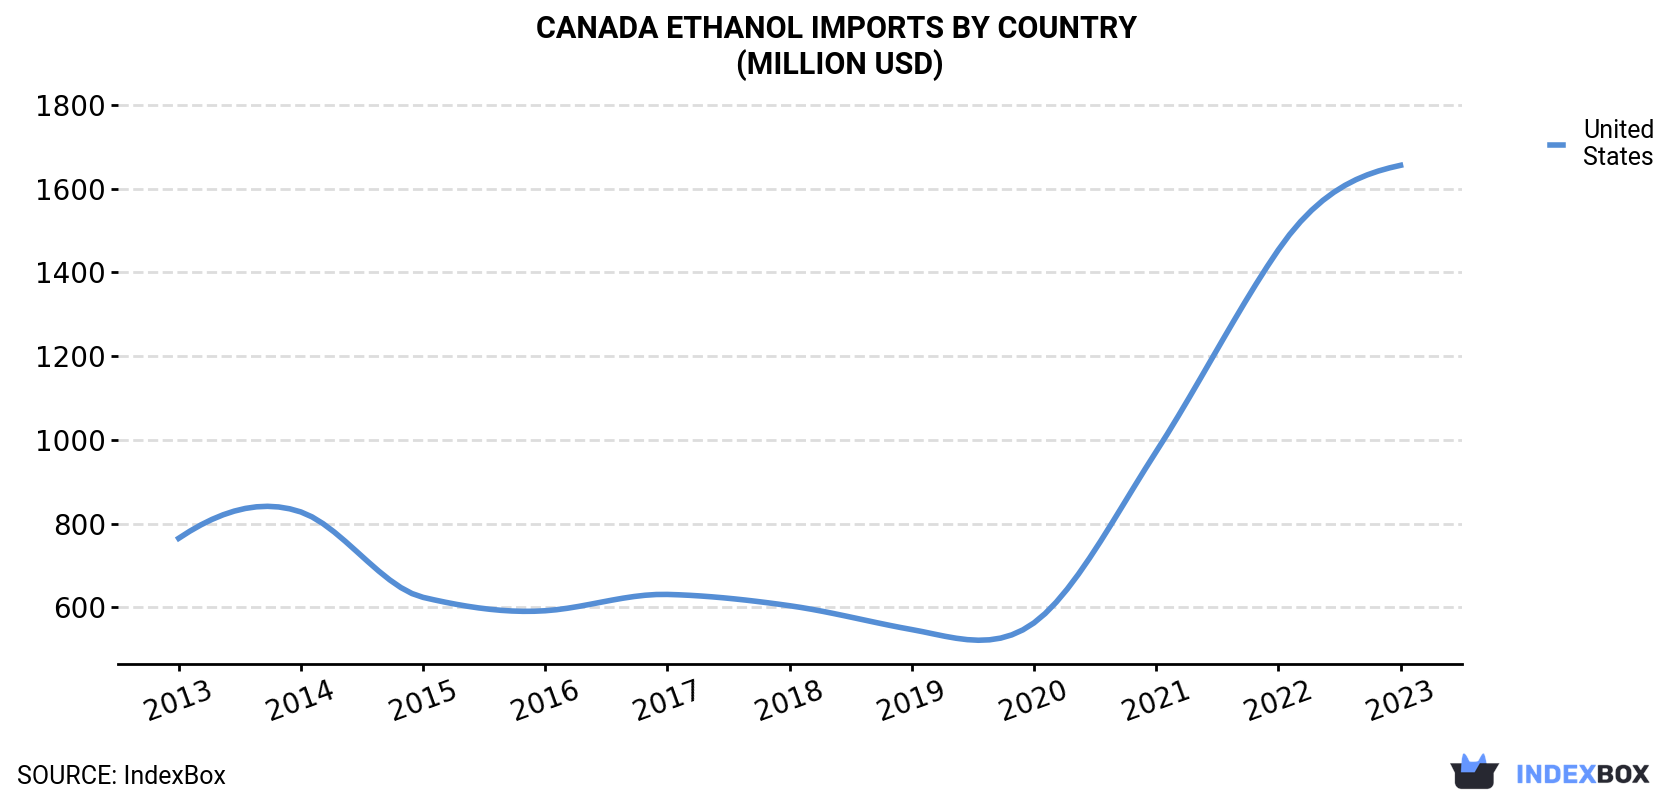 Canada Ethanol Imports By Country (Million USD)